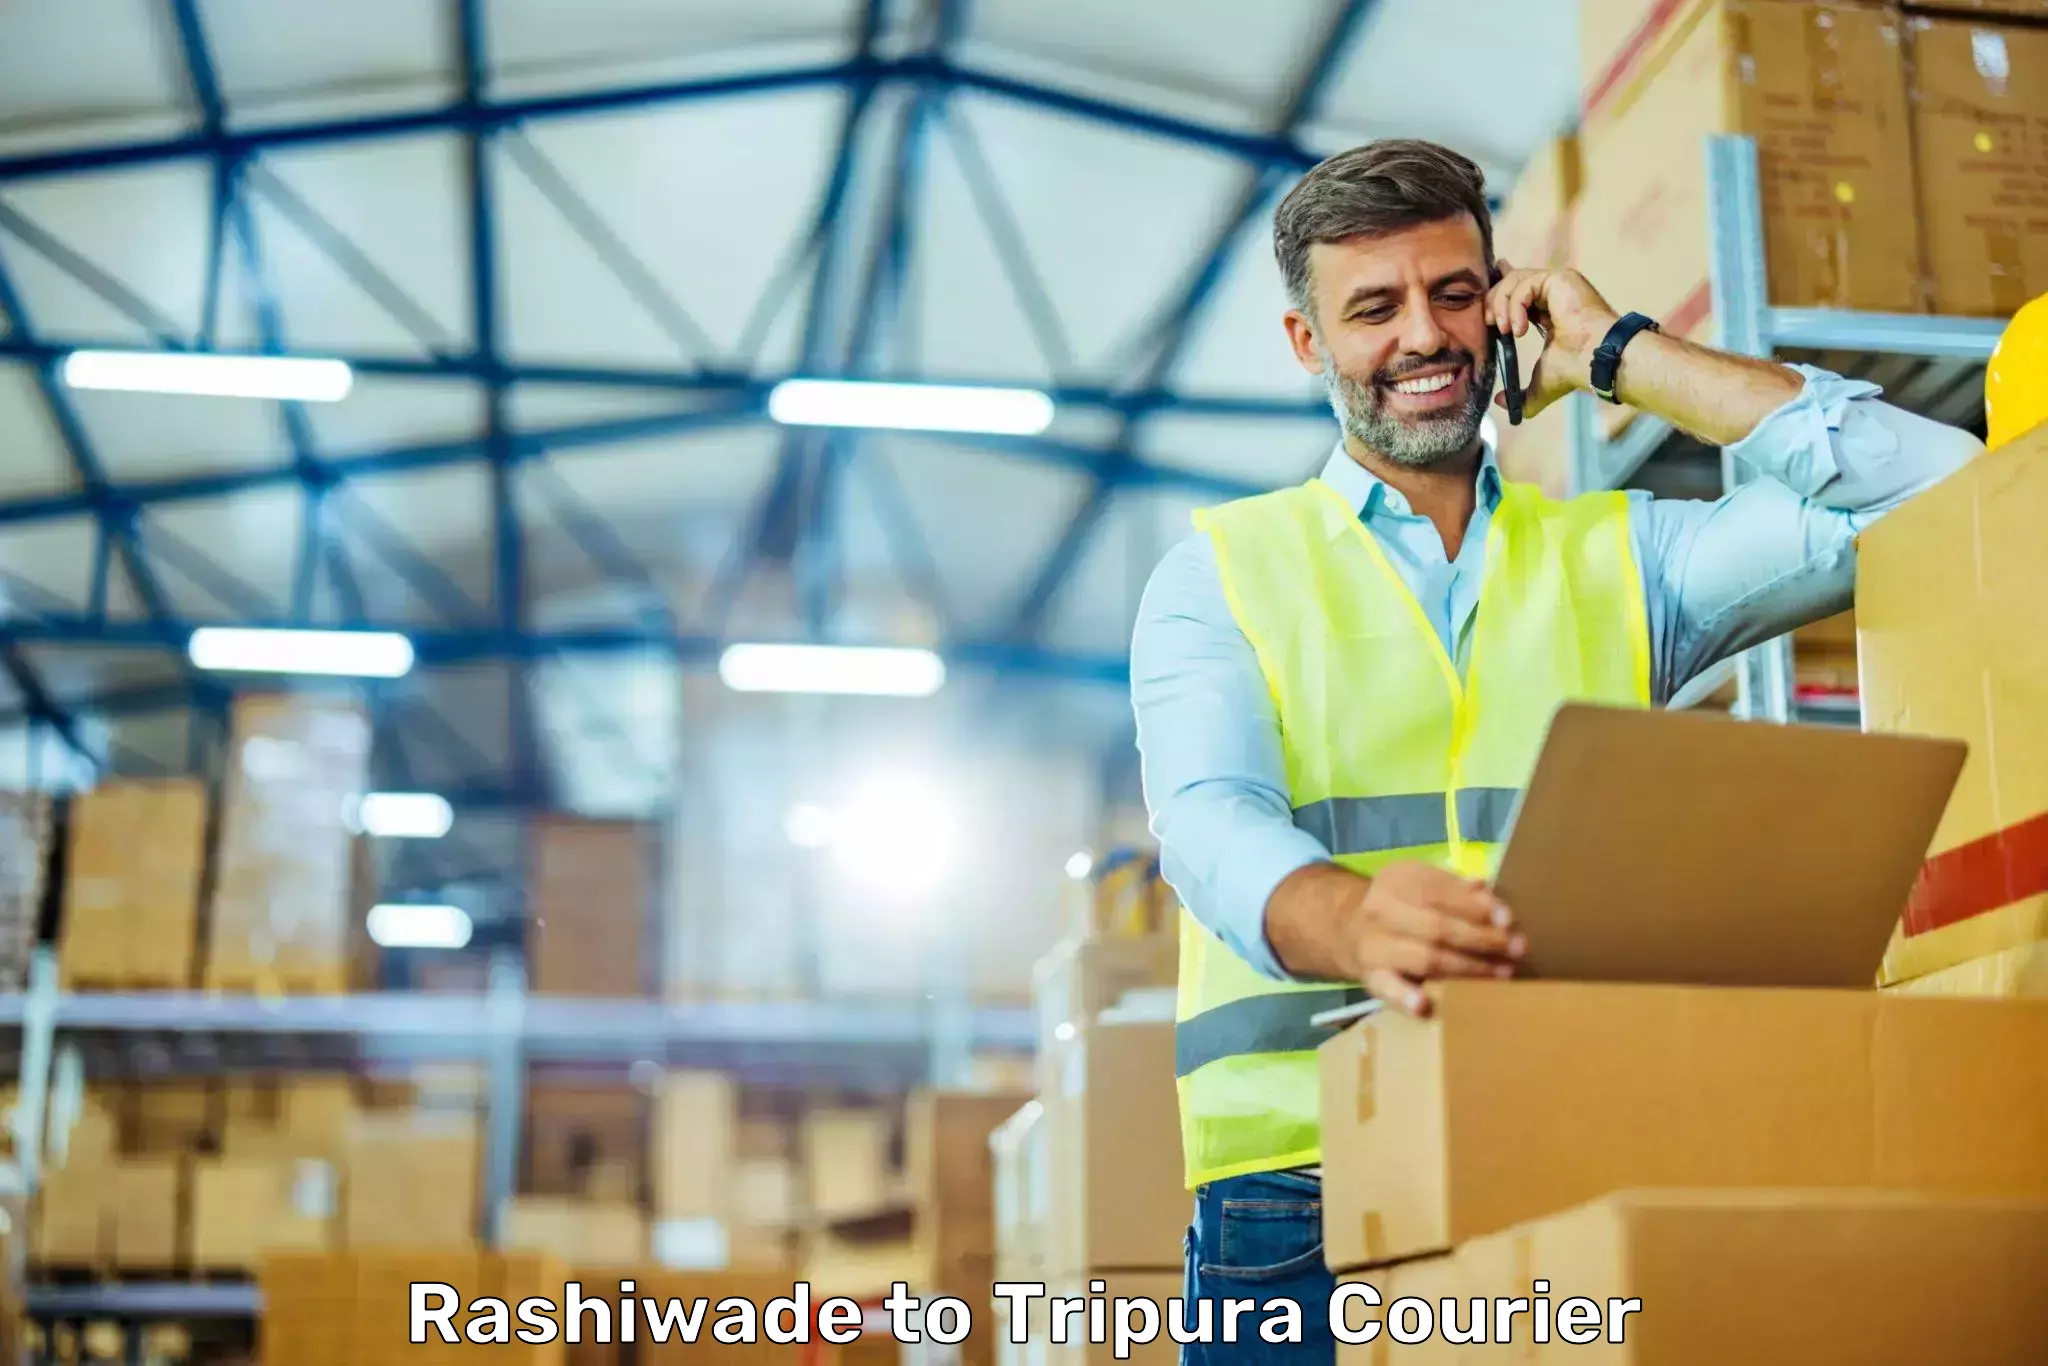 Flexible delivery schedules Rashiwade to Udaipur Tripura